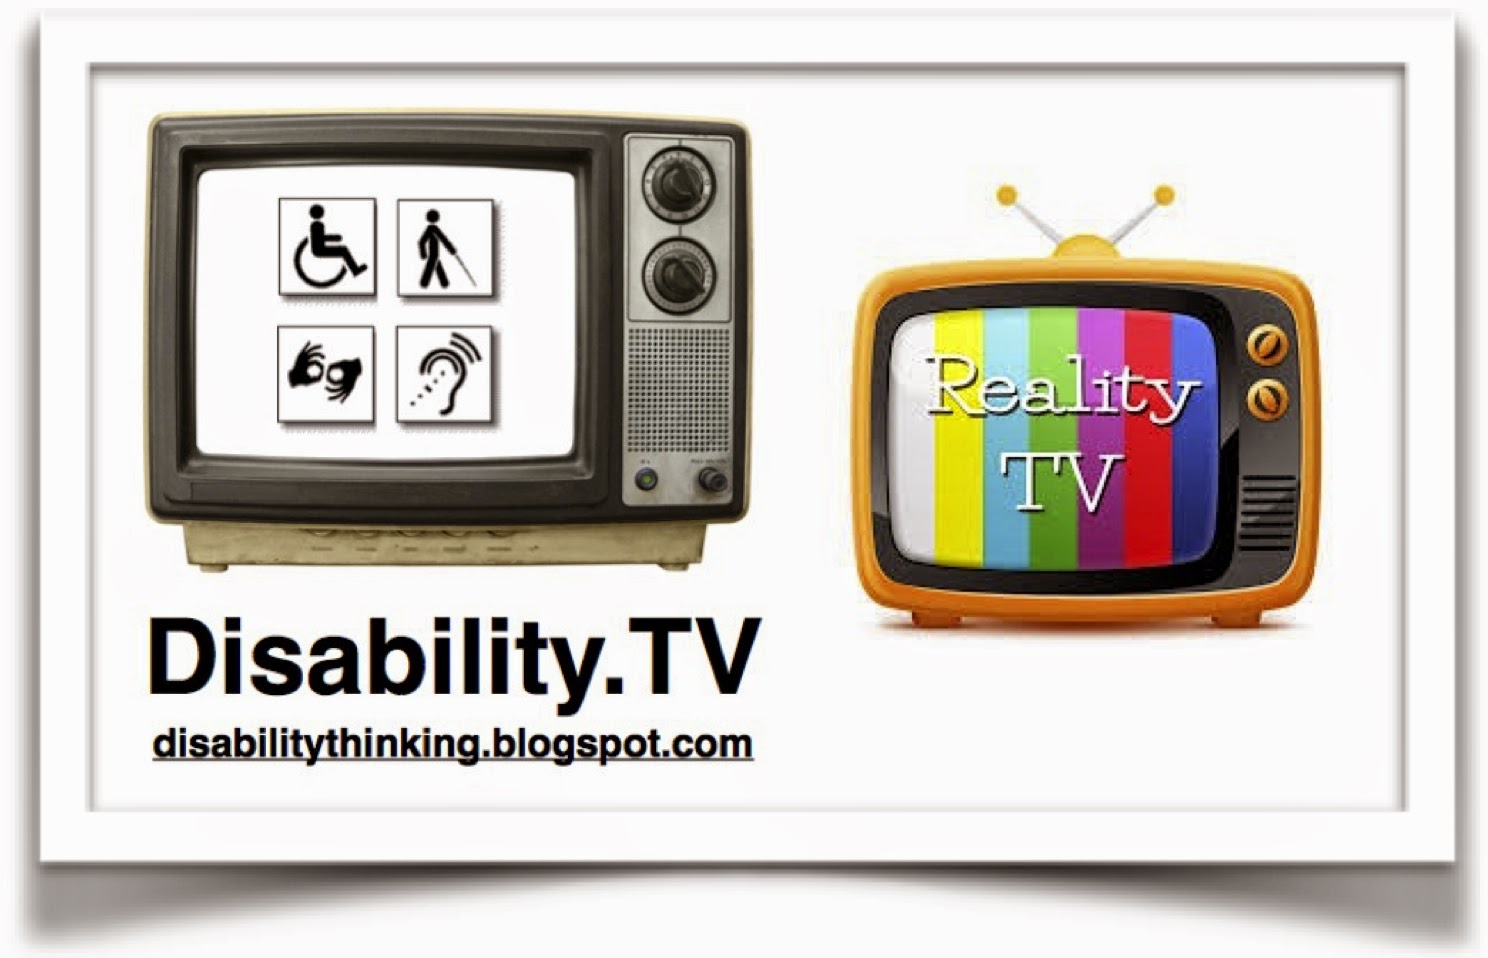 Disability.TV logo on the left, Reality TV illustration on the right